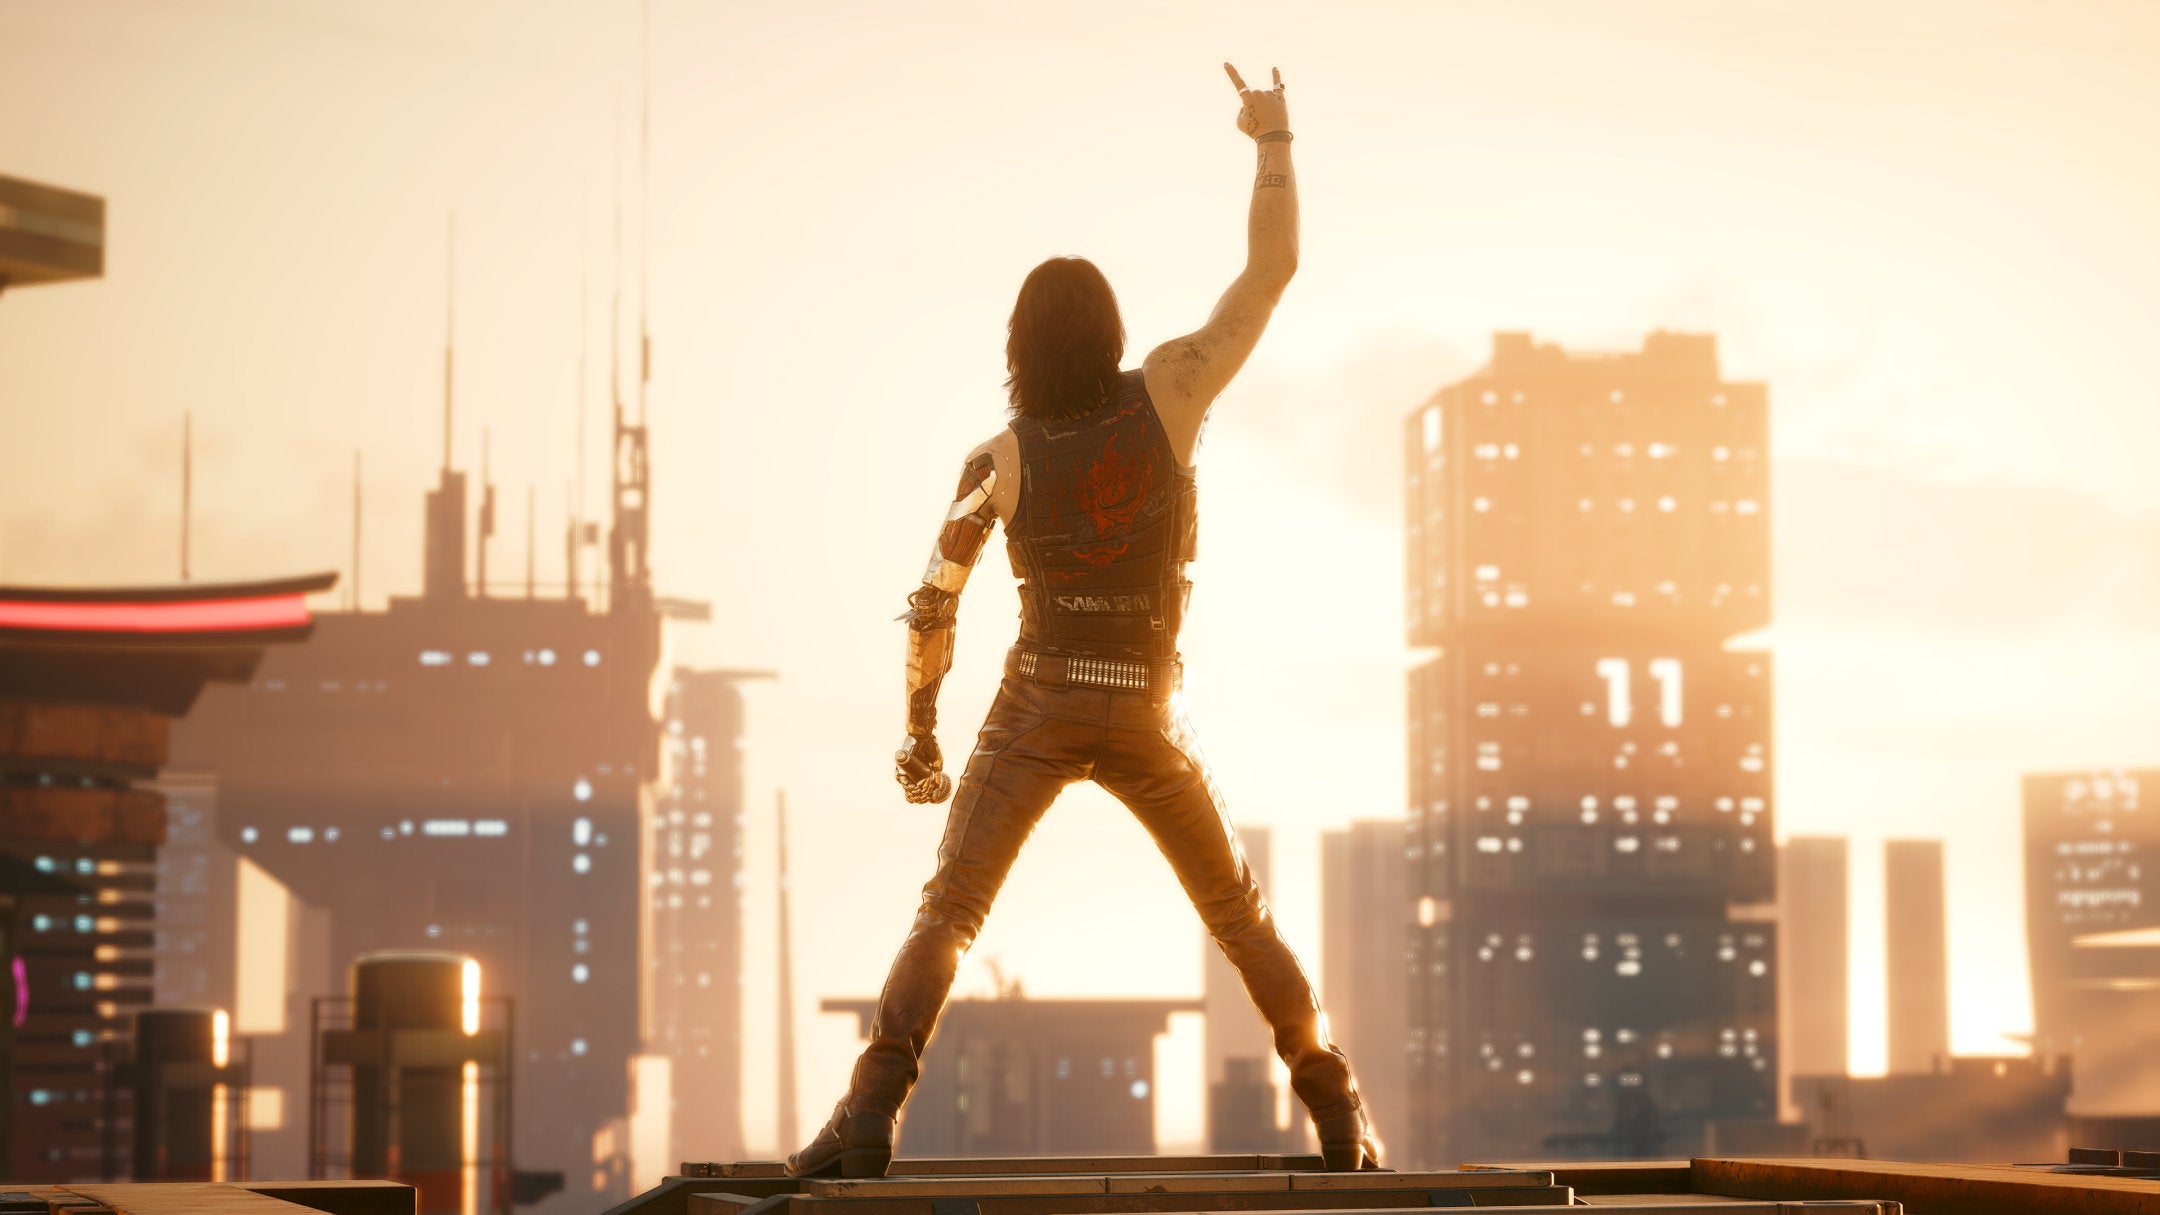 Johnny Silverhand, a character in Cyberpunk 2077, poses with his back to the camera, facing the skyline of Night City.